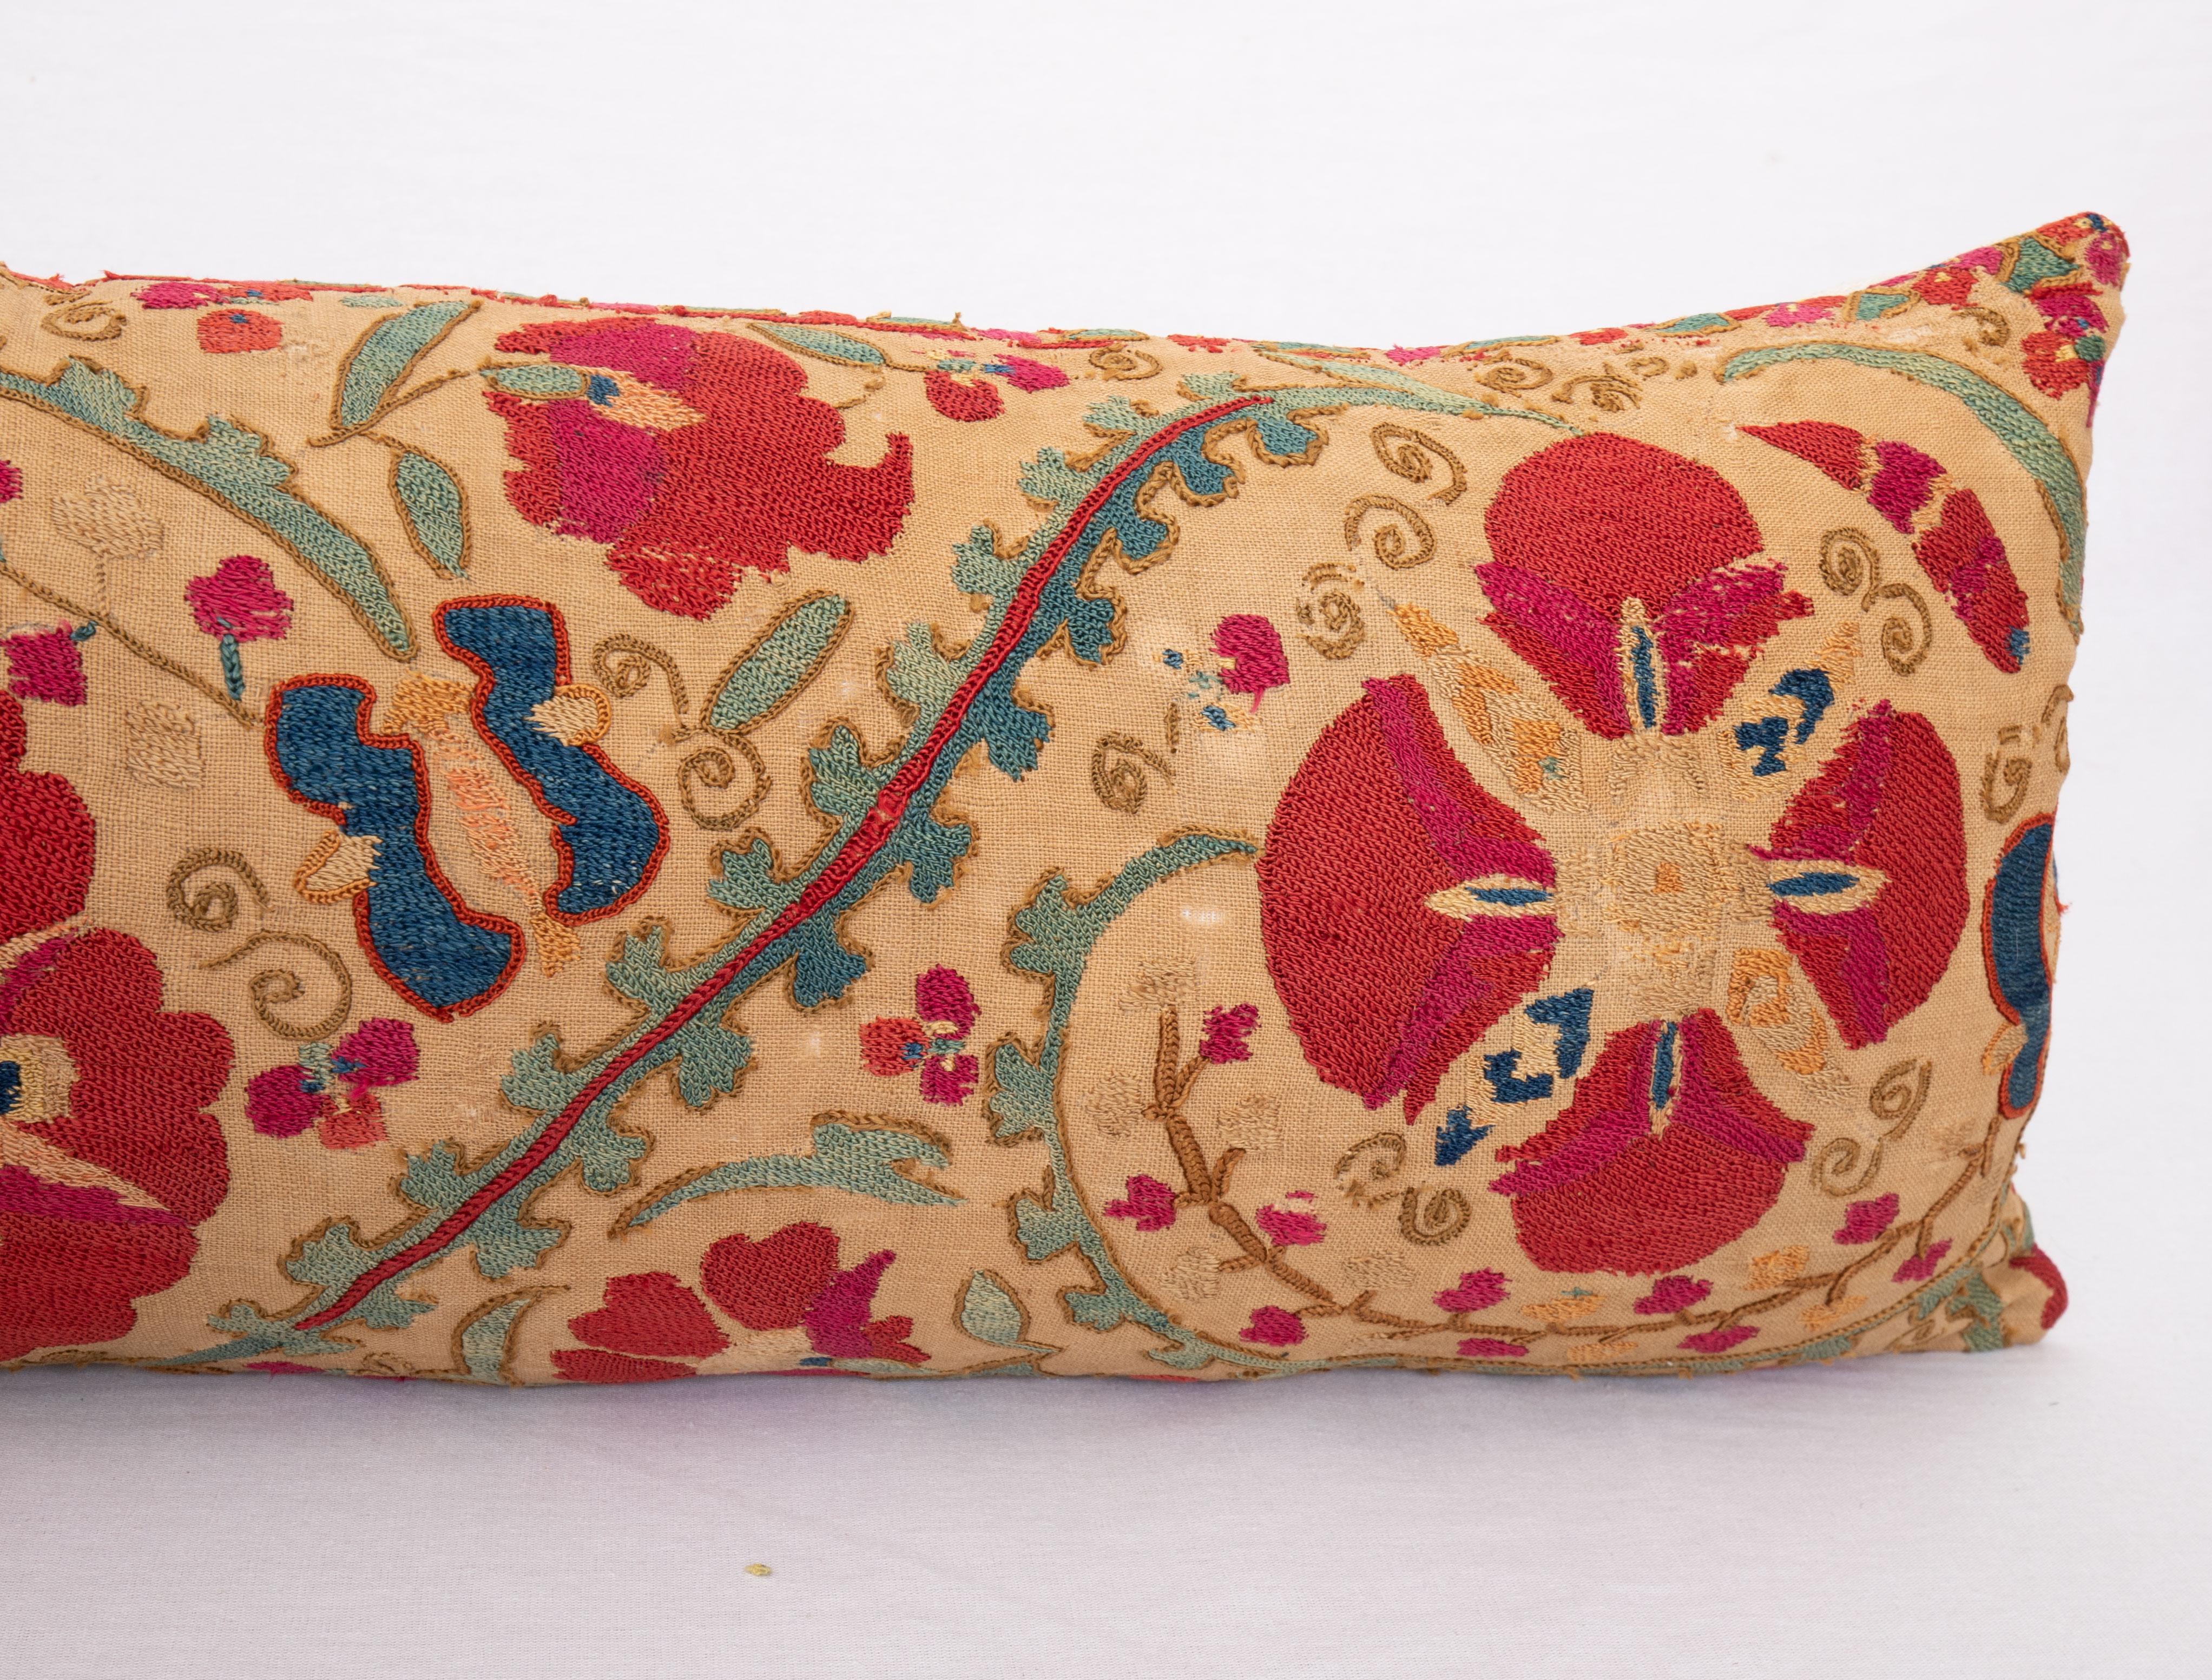 Suzani Pillow Case Made from an Antique Suzani Fragment, 19th Century 1